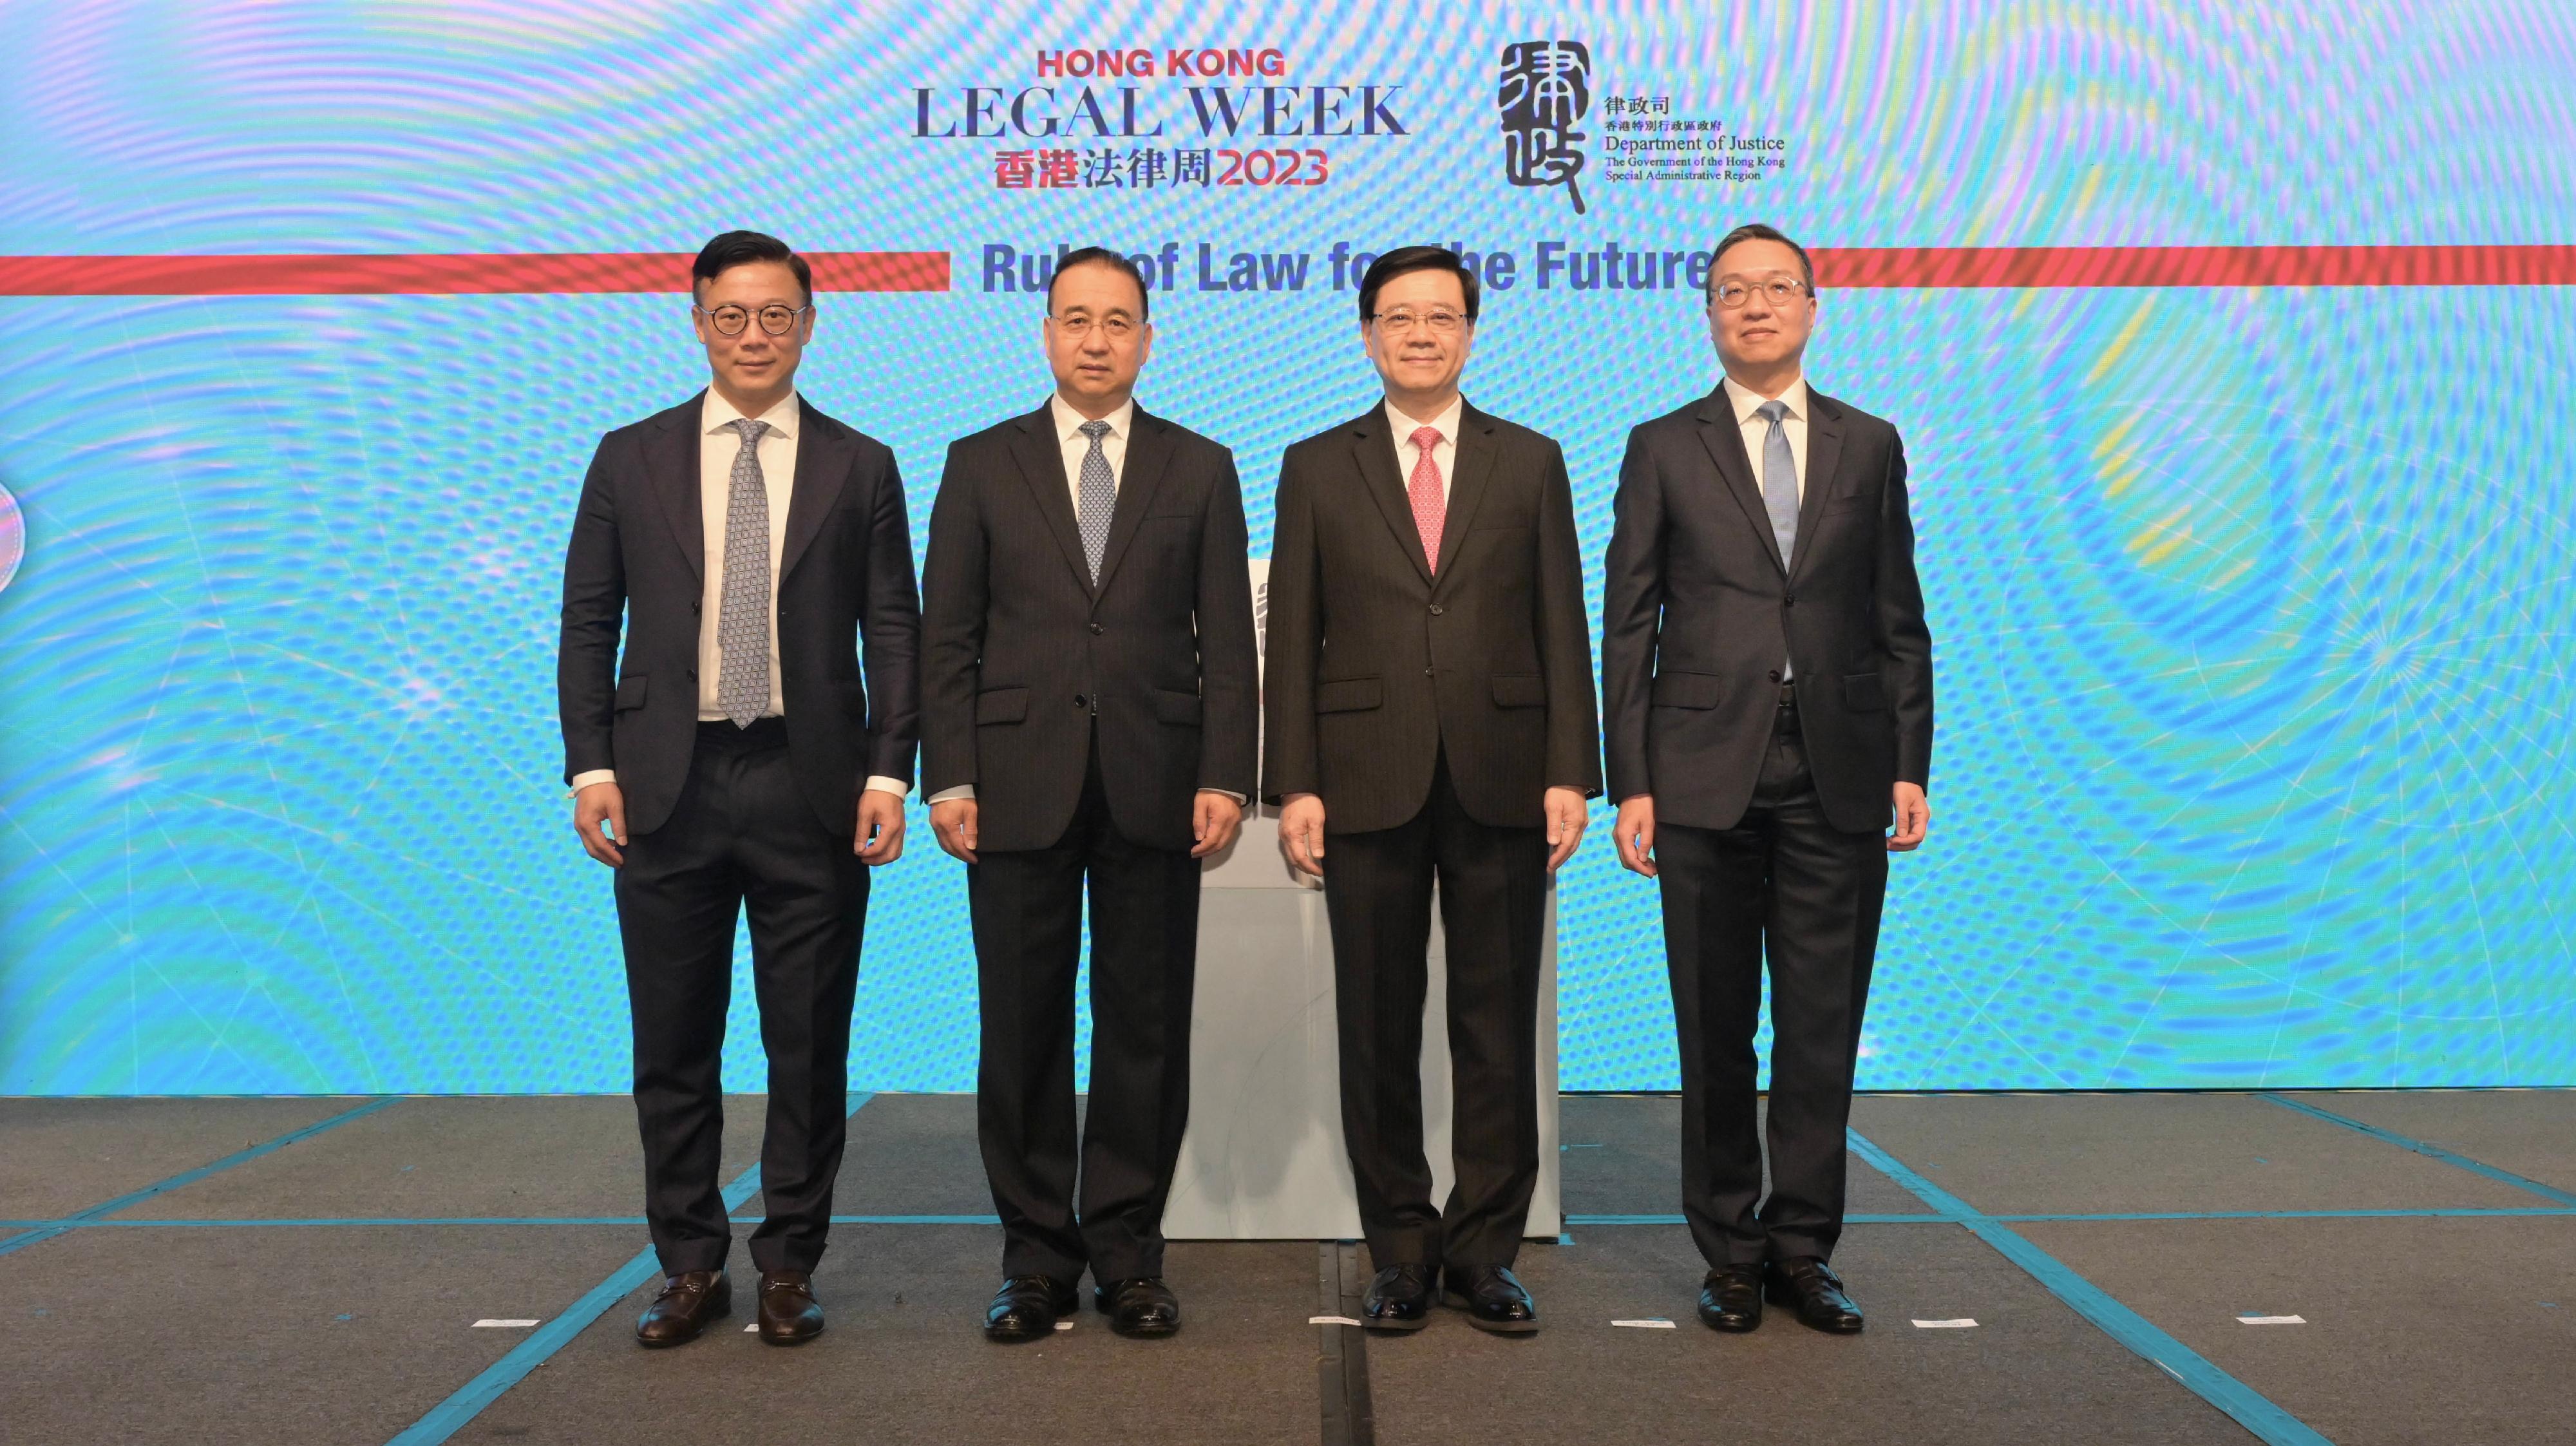 The Chief Executive, Mr John Lee, attended the Hong Kong Legal Week 2023: Rule of Law for the Future this morning (November 10). Photo shows (from left) the Deputy Secretary for Justice, Mr Cheung Kwok-kwan; Deputy Director of the Liaison Office of the Central People's Government in the Hong Kong Special Administrative Region Mr Liu Guangyuan; Mr Lee; and the Secretary for Justice, Mr Paul Lam, SC, at the event.